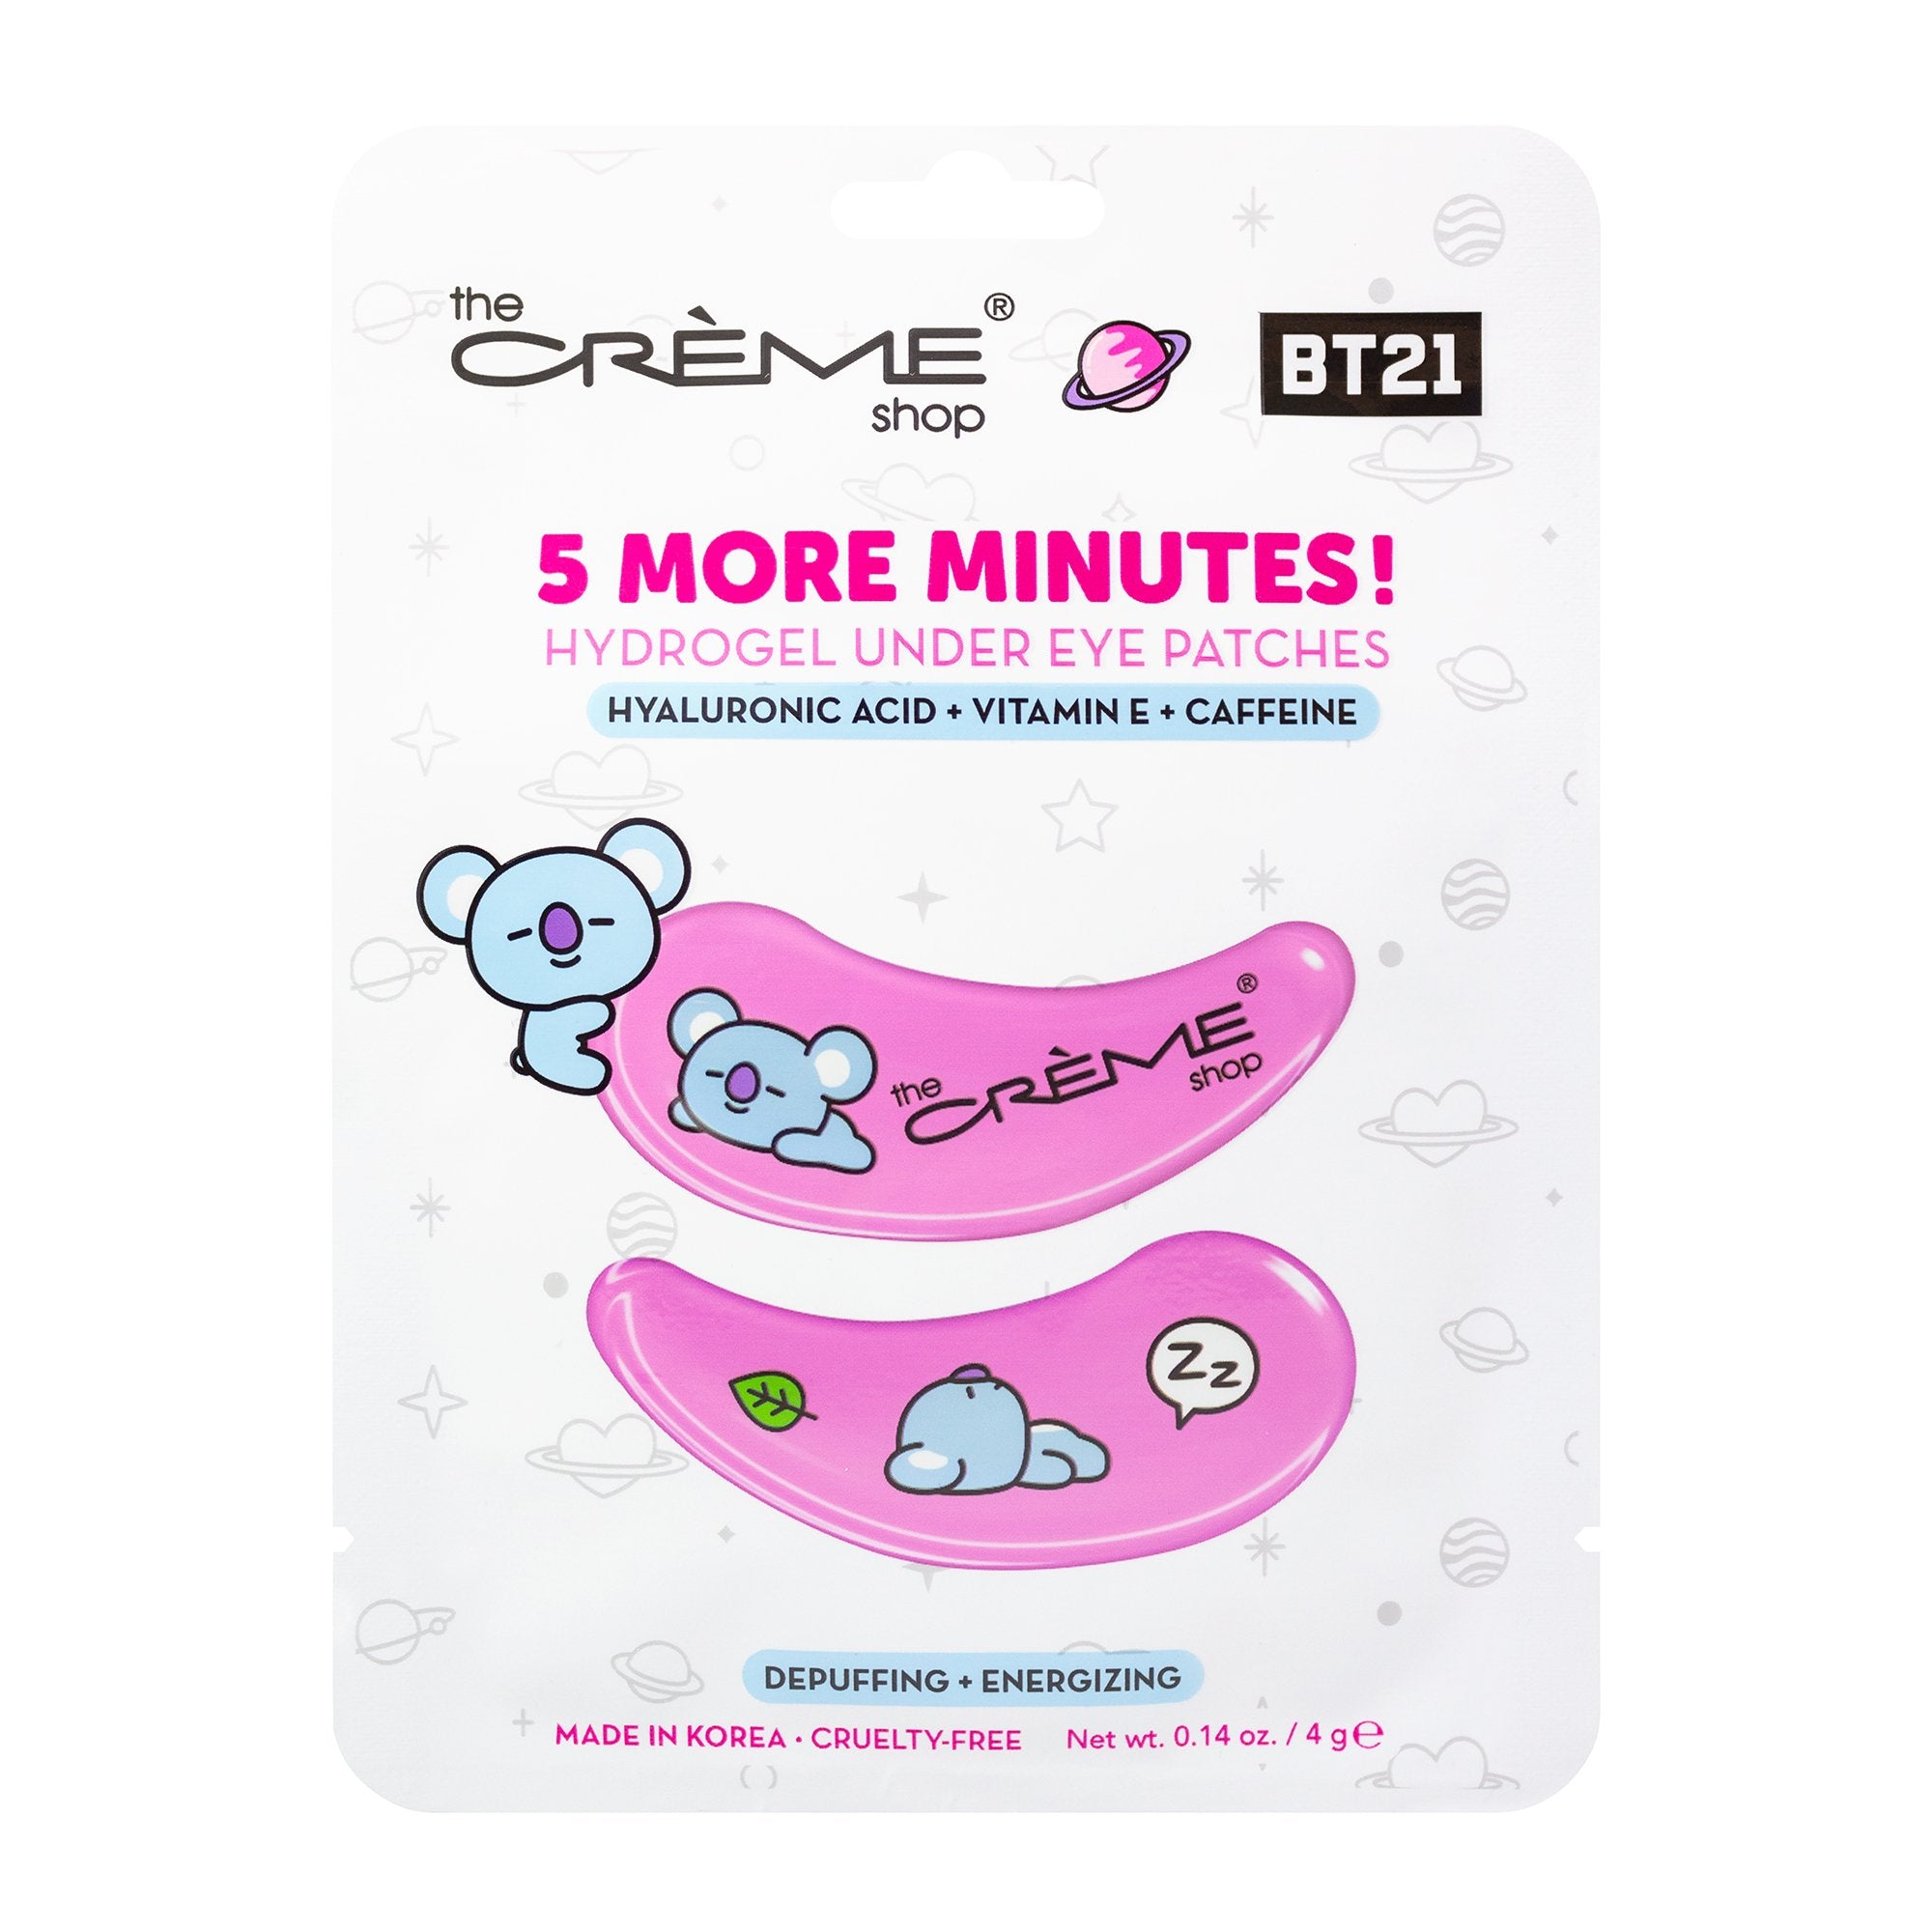 “5 More Minutes!” KOYA Hydrogel Under Eye Patches | Depuffing & Energizing Under Eye Patches The Crème Shop x BT21 